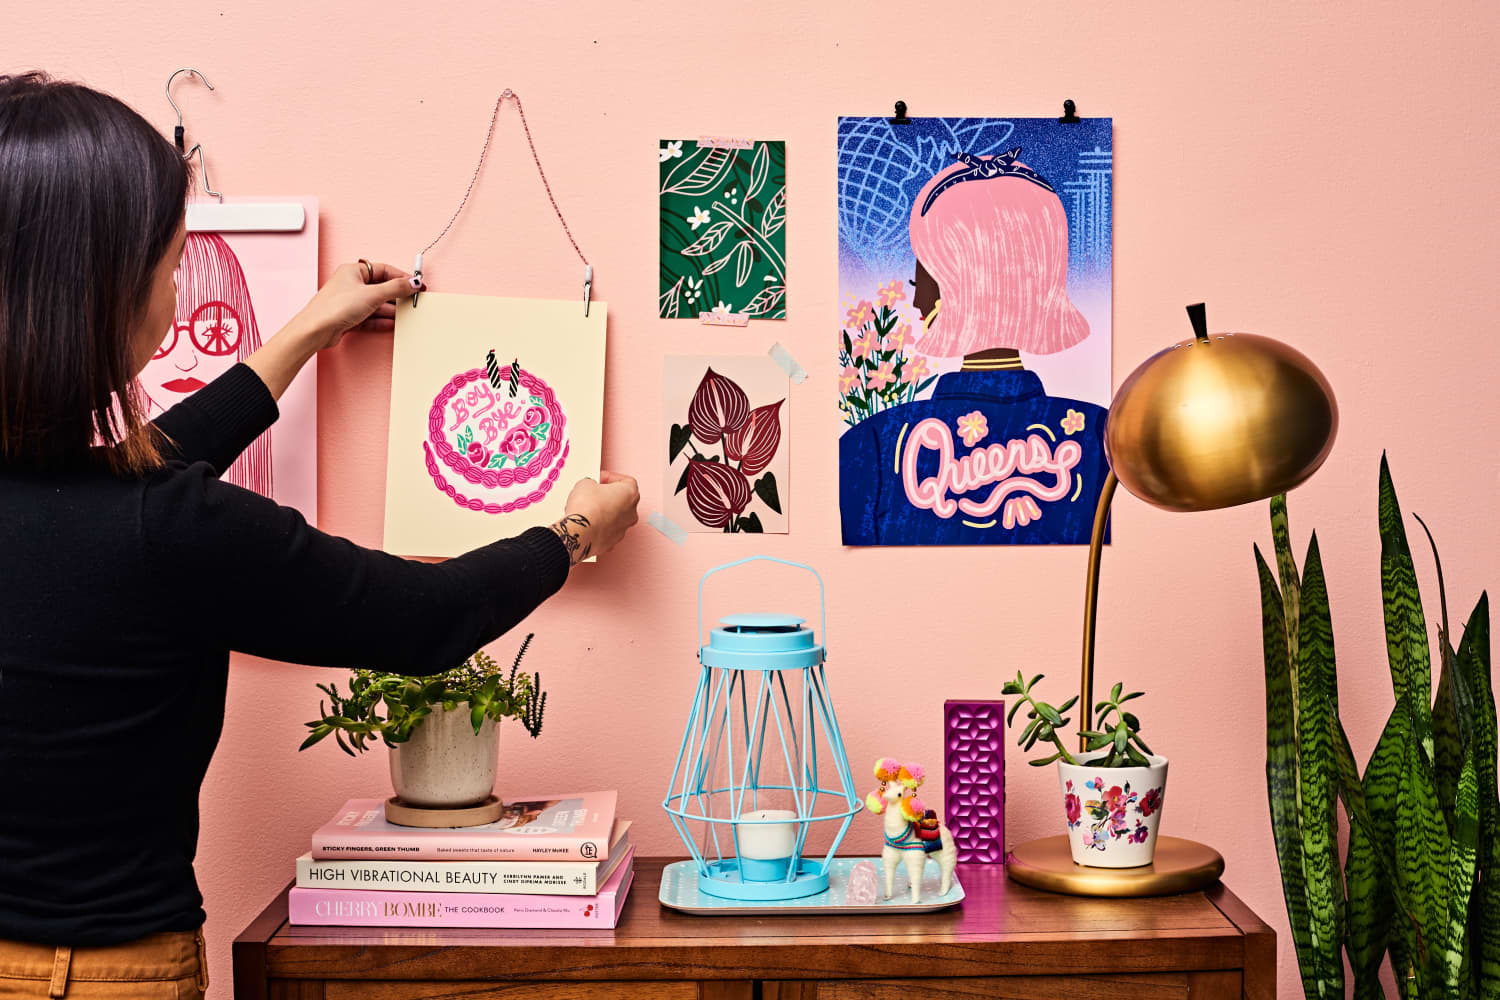 How to hang posters without damaging walls: 6 damage-free ways